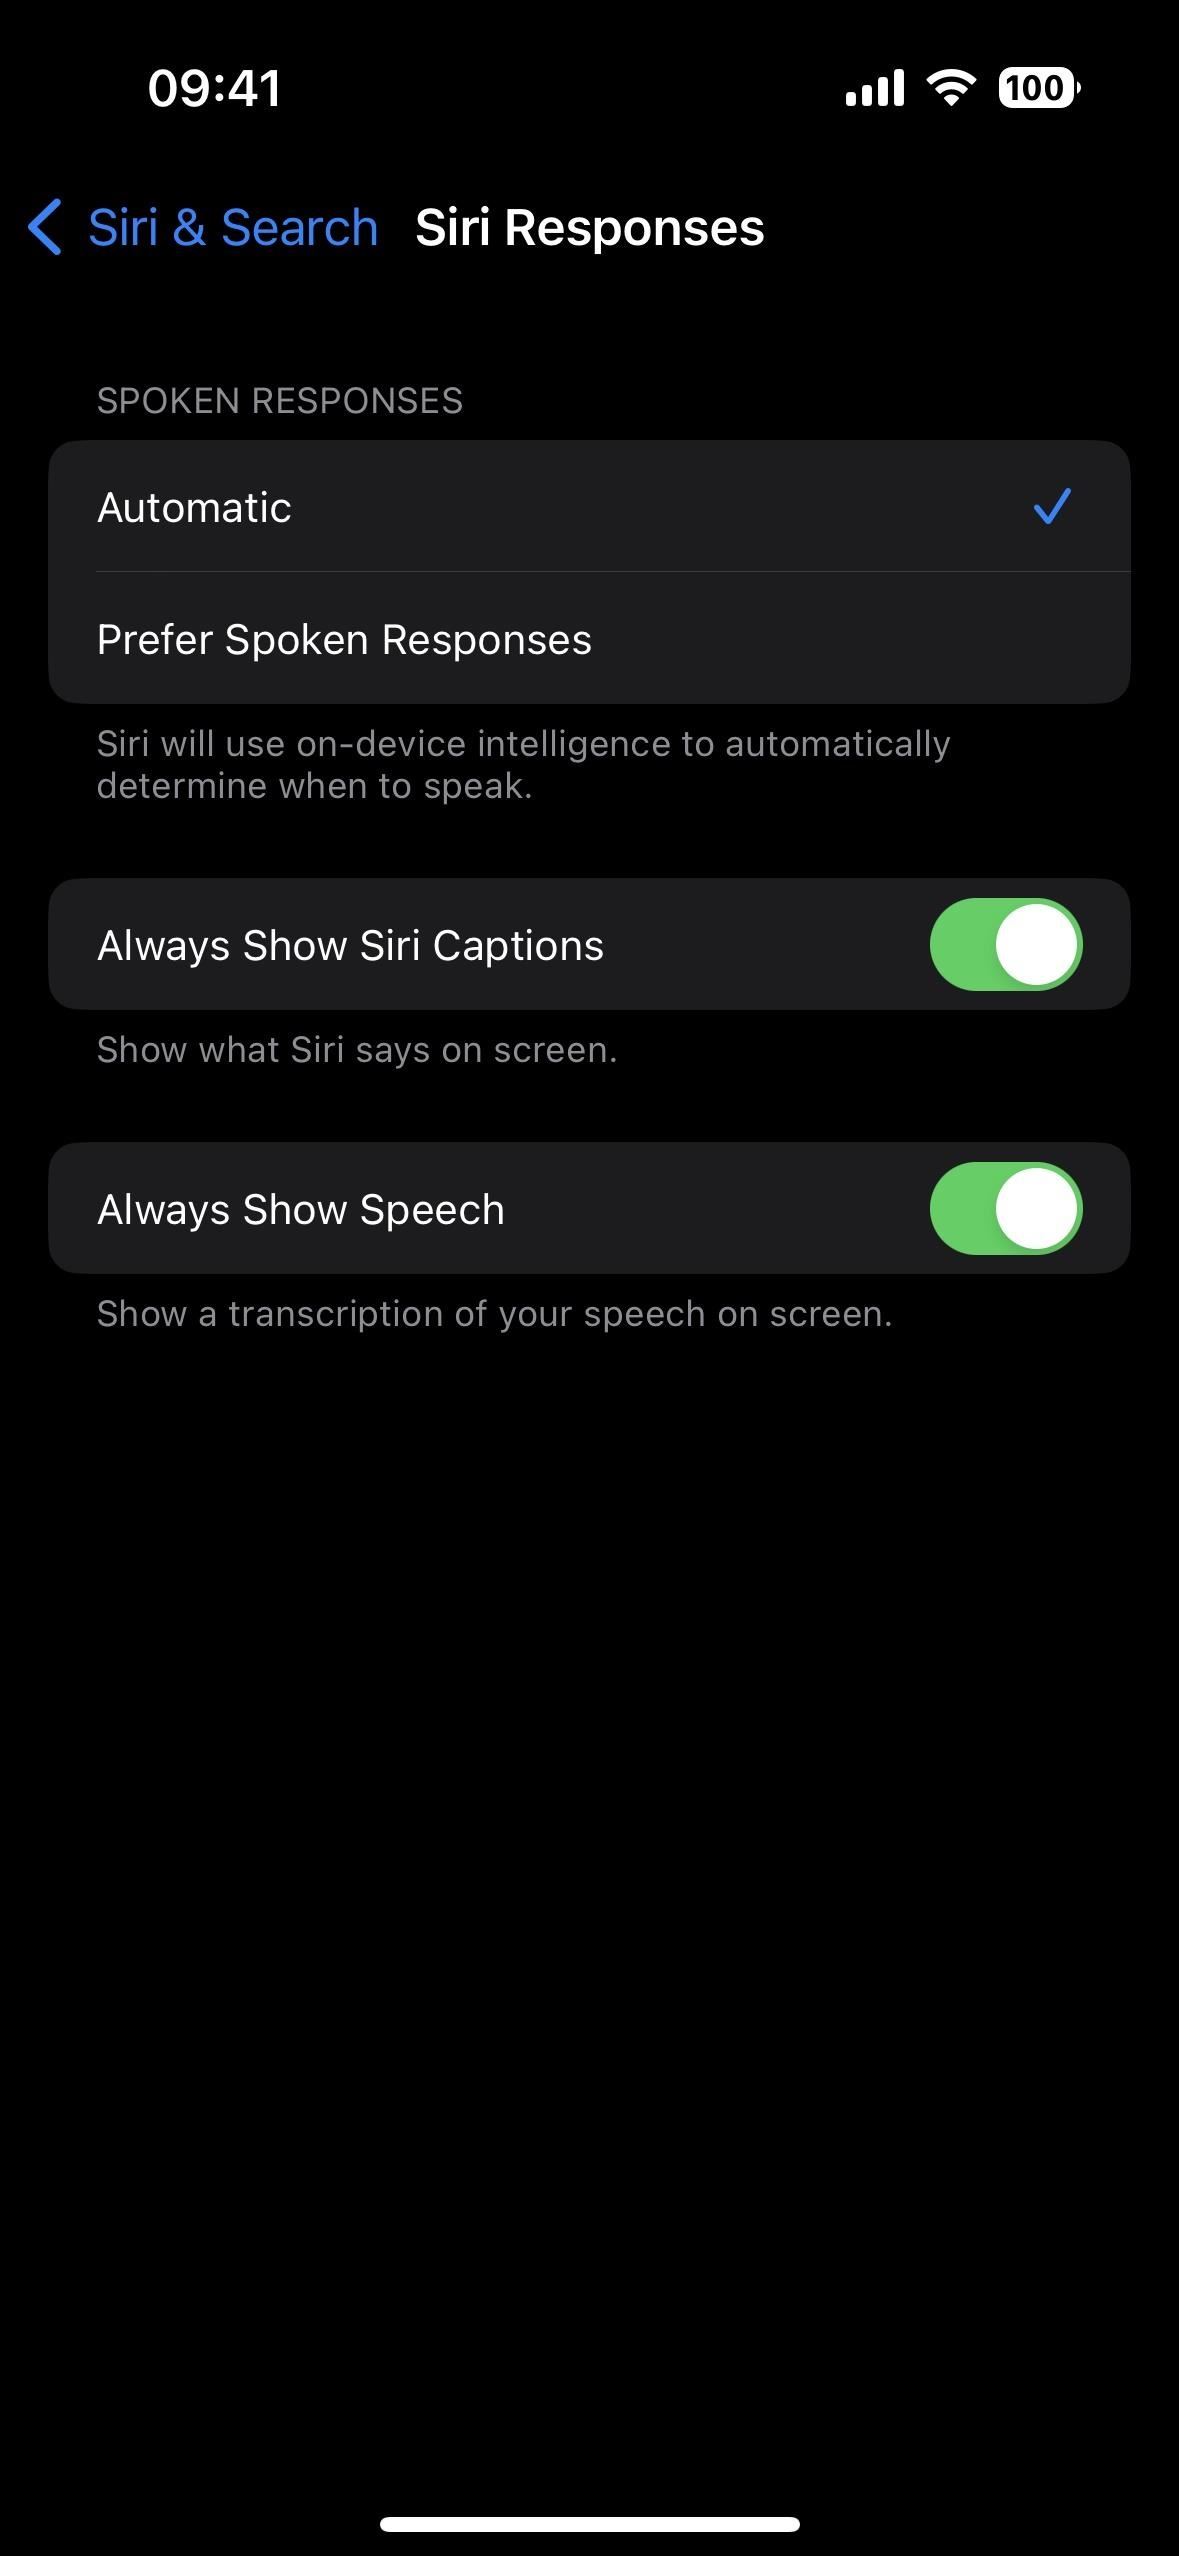 Apple Just Fixed Siri's Voice Feedback Issue on iOS 16, Giving You Back More Control Over Audible Responses